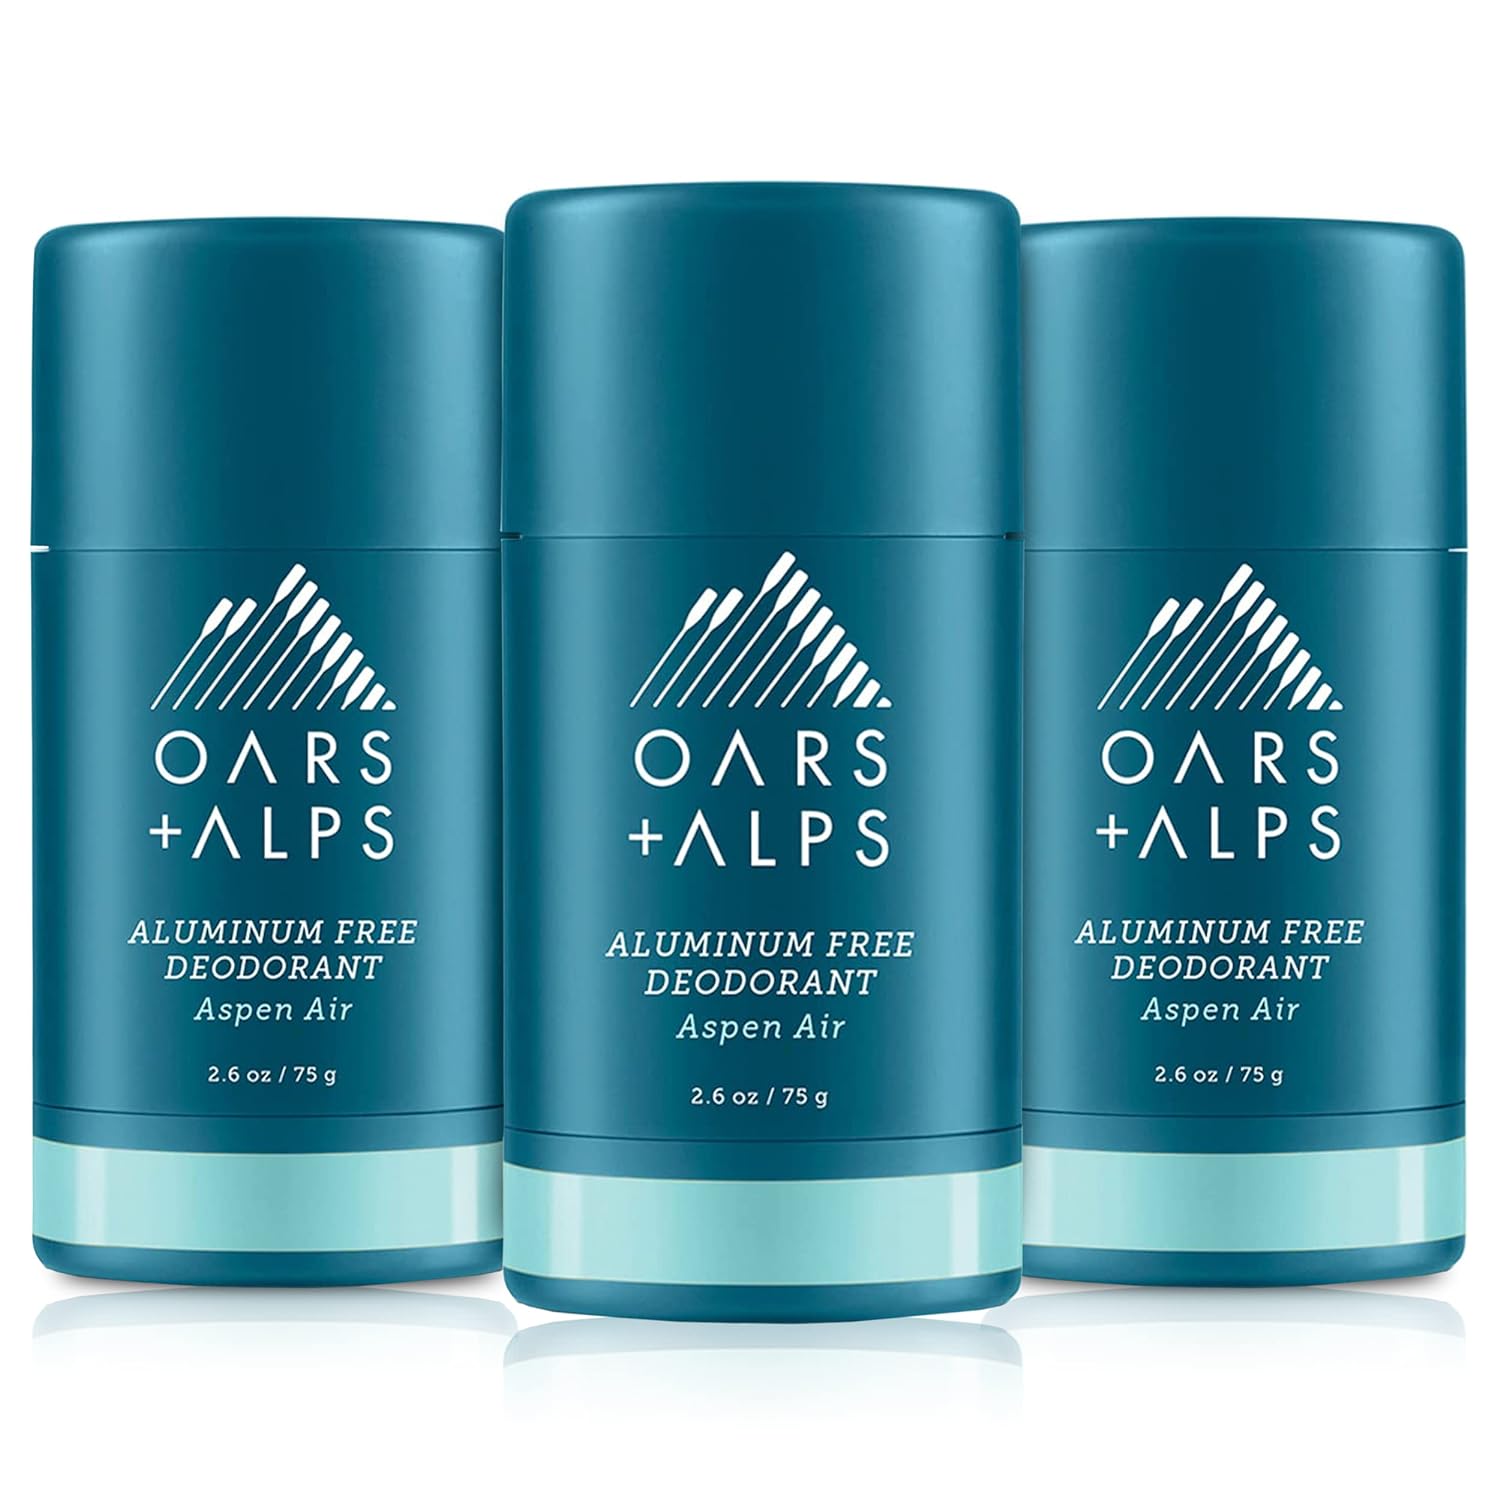 Oars + Alps Aluminum Free Deodorant for Men and Women, Dermatologist Tested and Made with Clean Ingredients, Travel Size, Aspen Air, 3 Pack, 2.6 Oz Each